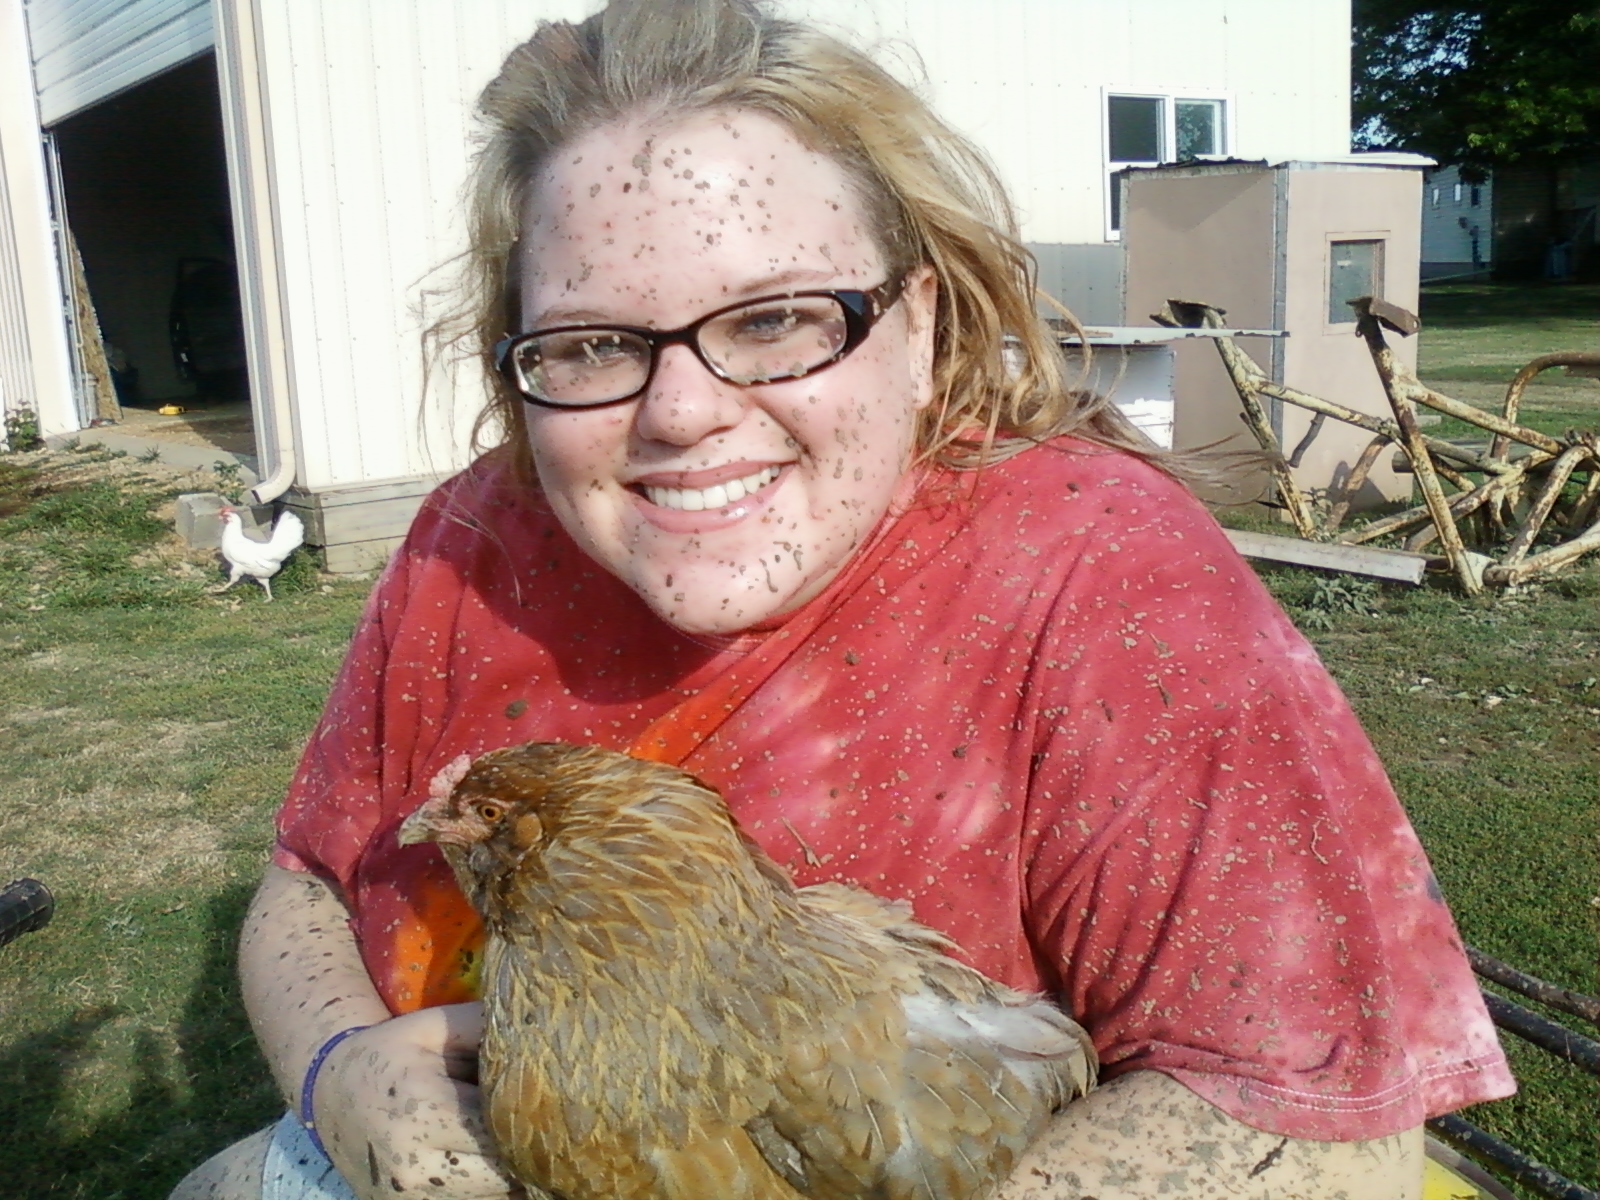 me after muddin in my four wheeler with my adorable ameraucana hen, Sweetheart